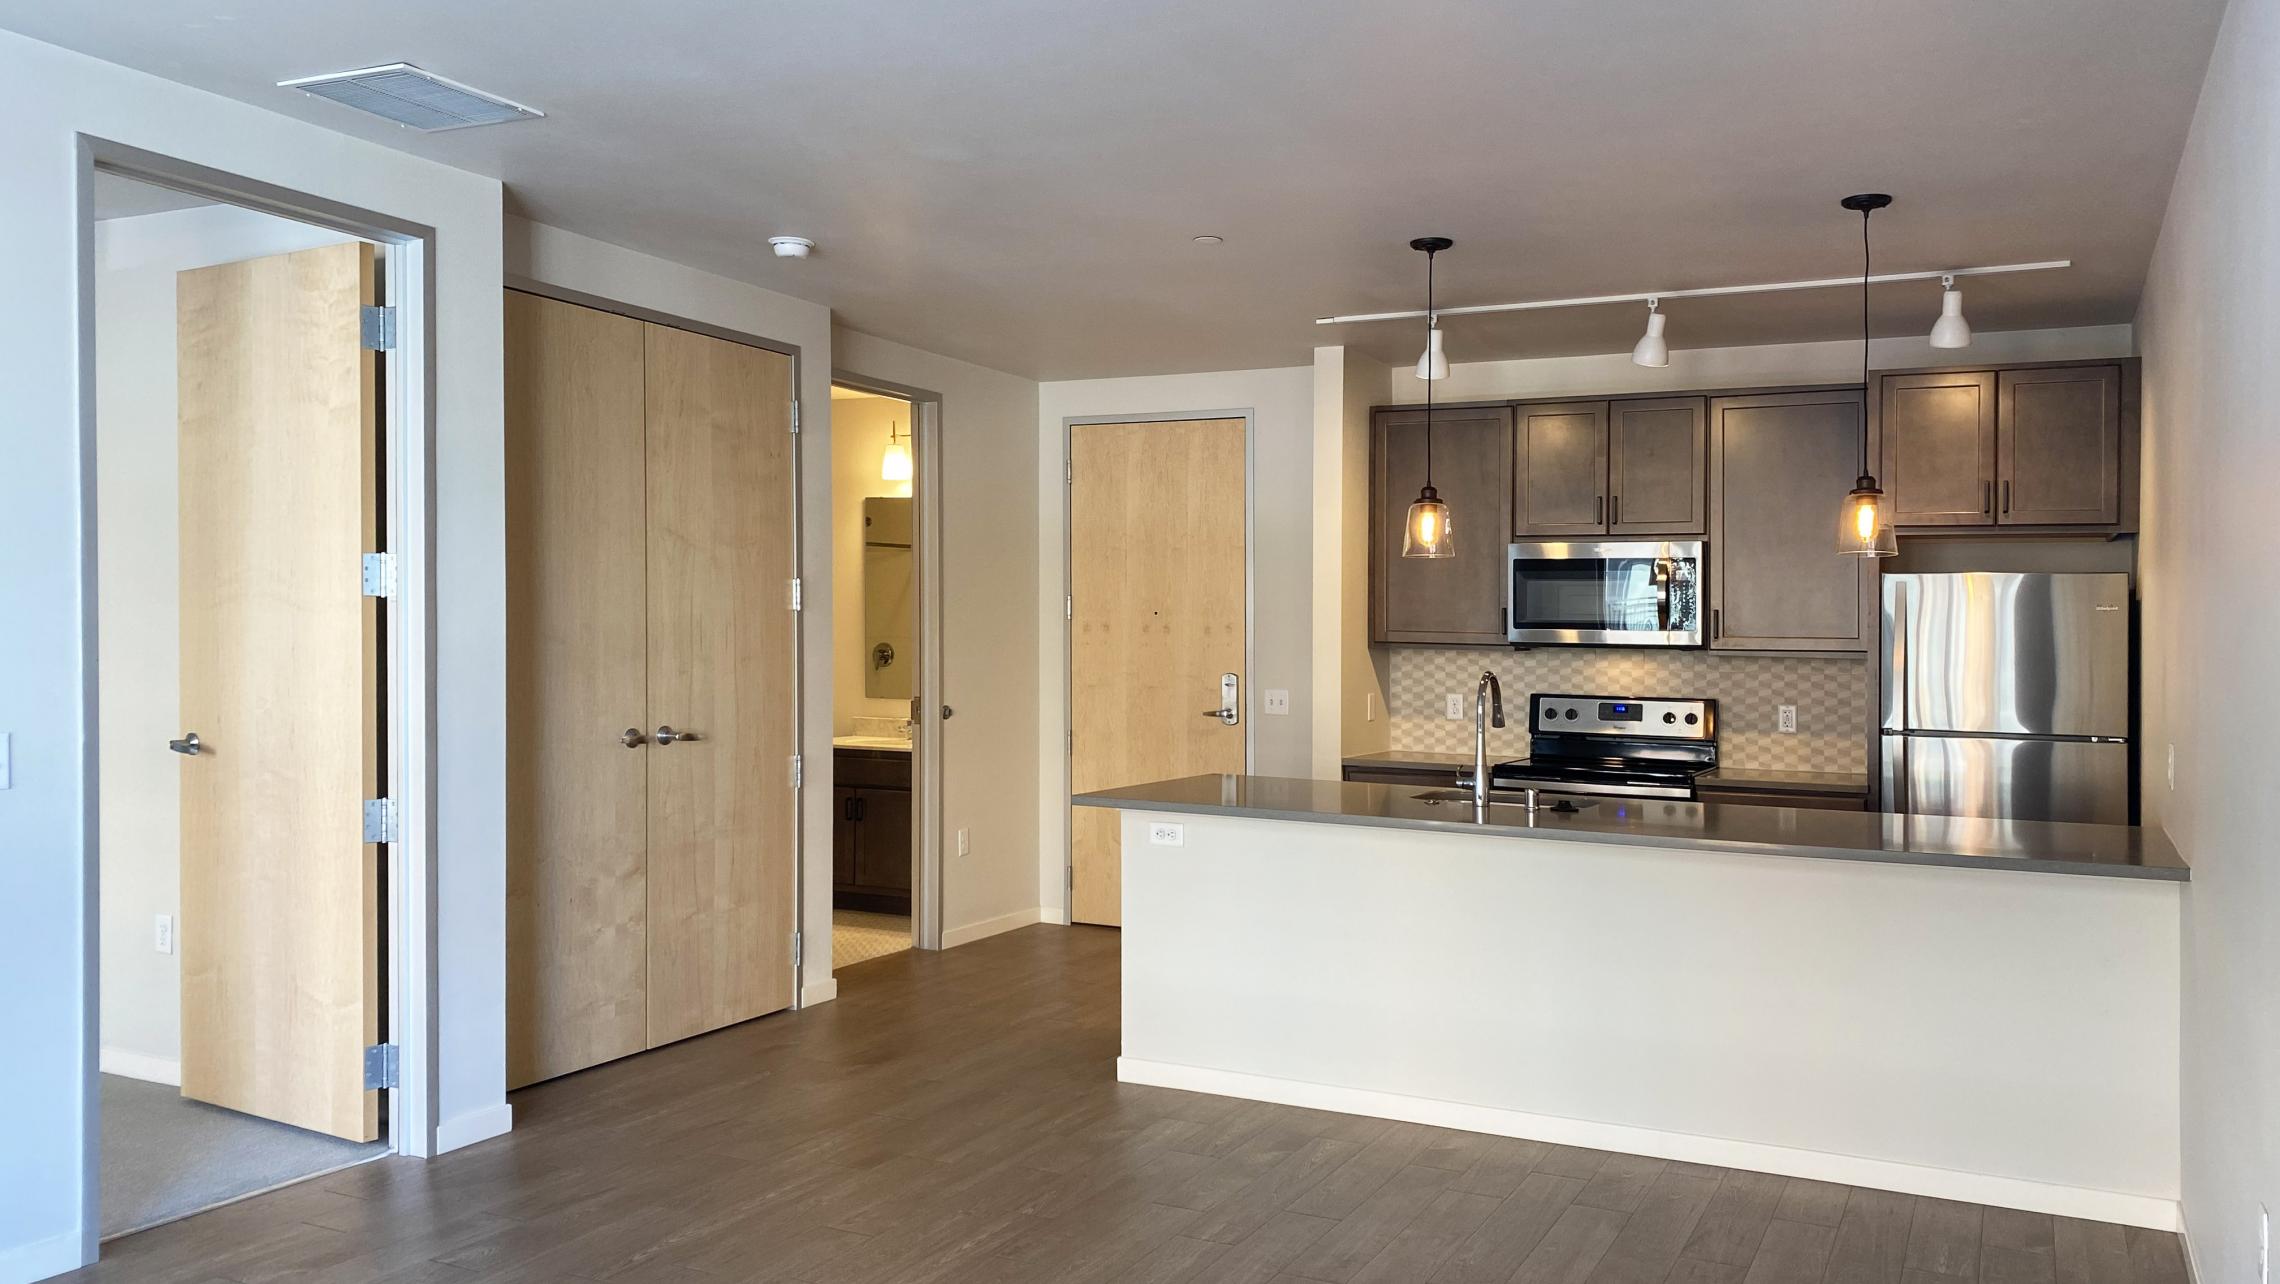 Quarter-Row-At-The-Yards-Apartment-223-One-Bedroom-Modern-Lifestyle-Cozy-Home-Lifestyle-Design-Laundry-Kitchen-Madison-Bike-Trails-Lake-Downtown-Capitol-Lounge-Gym-Courtyard-Fireplace-Grill